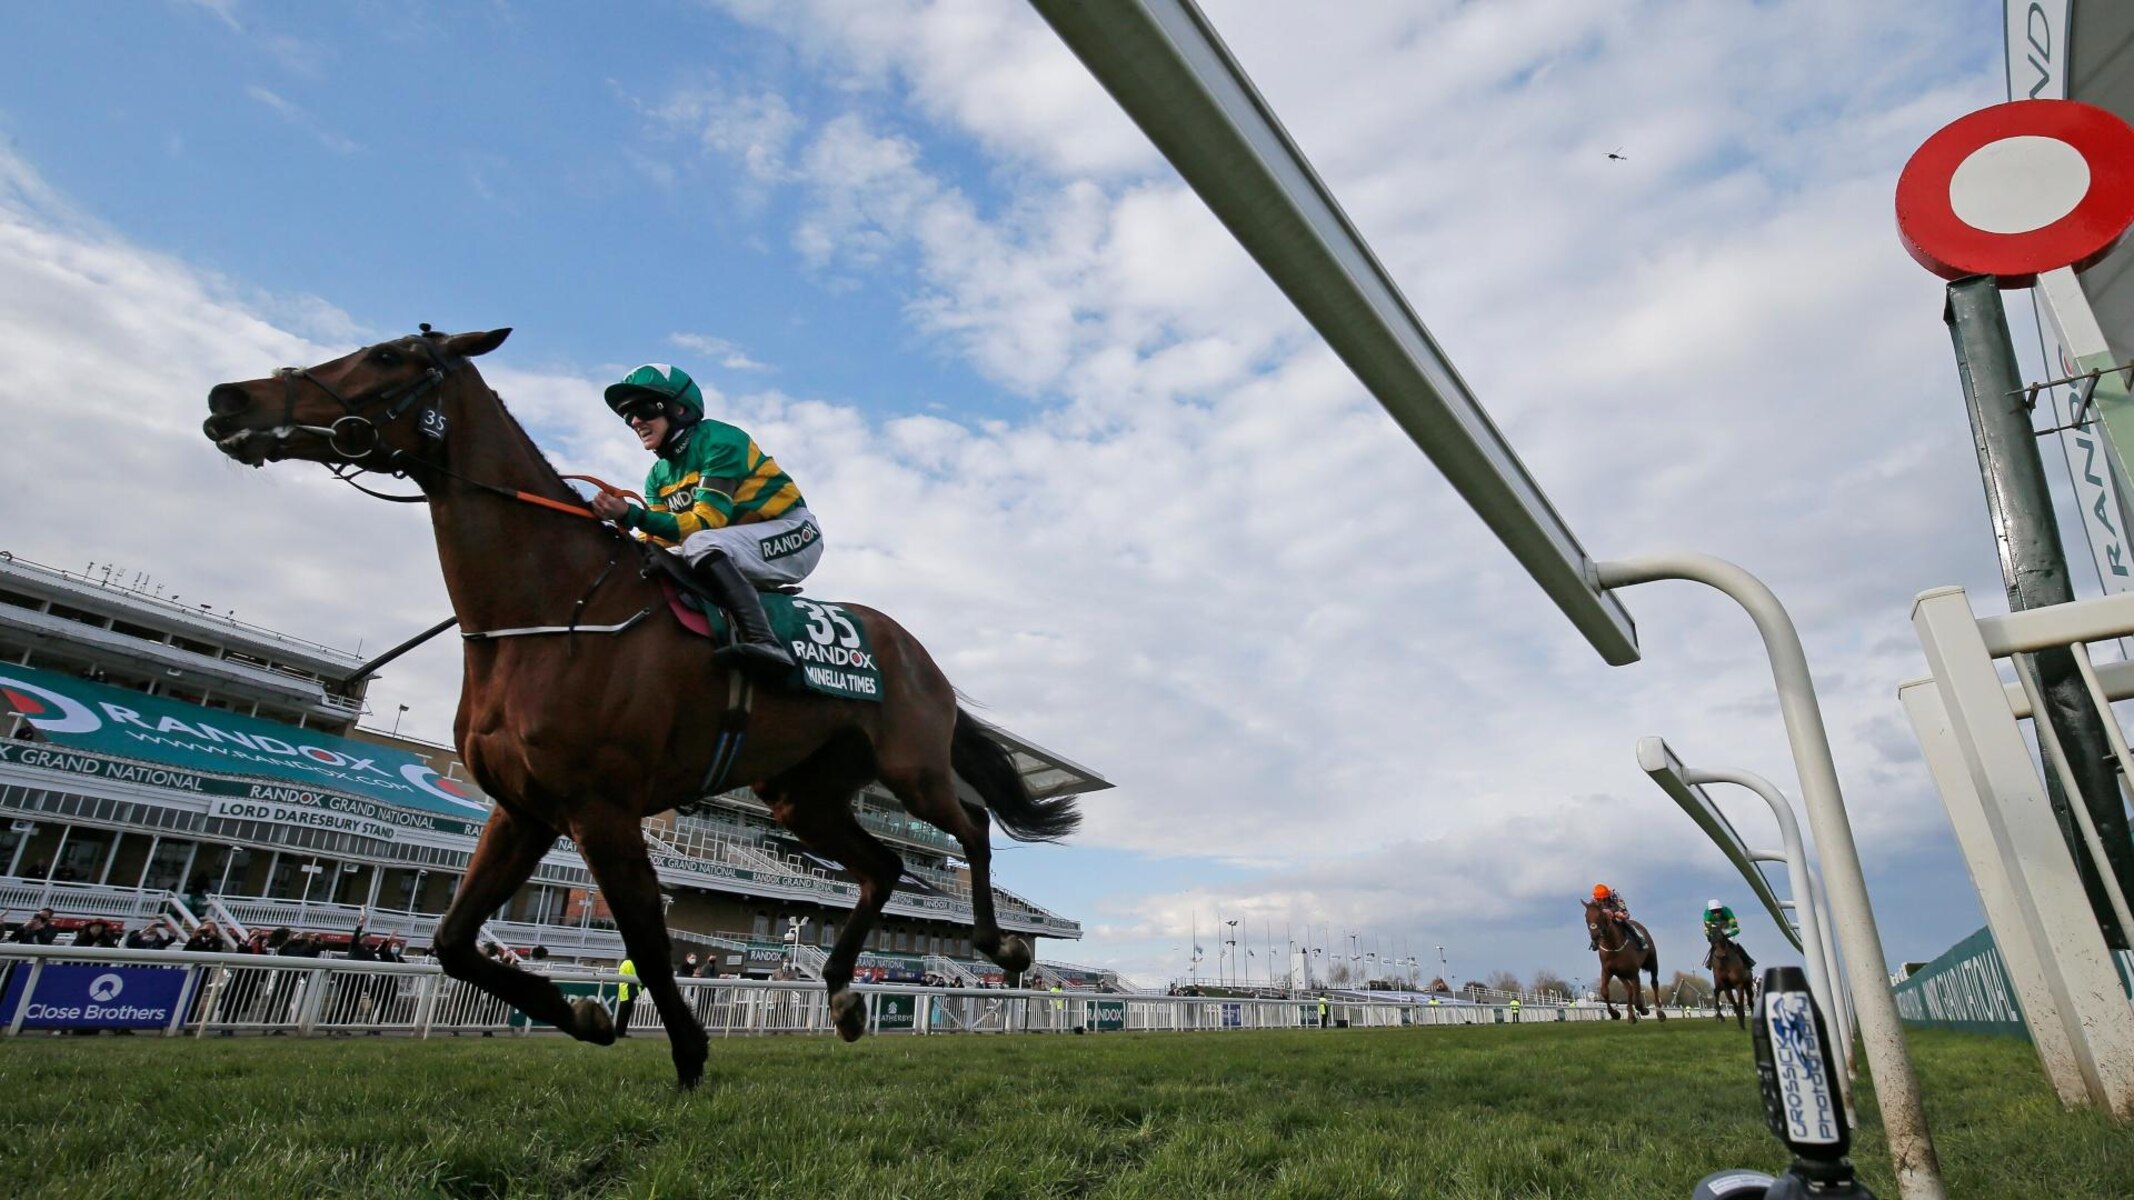 13-facts-about-grand-national-horse-race